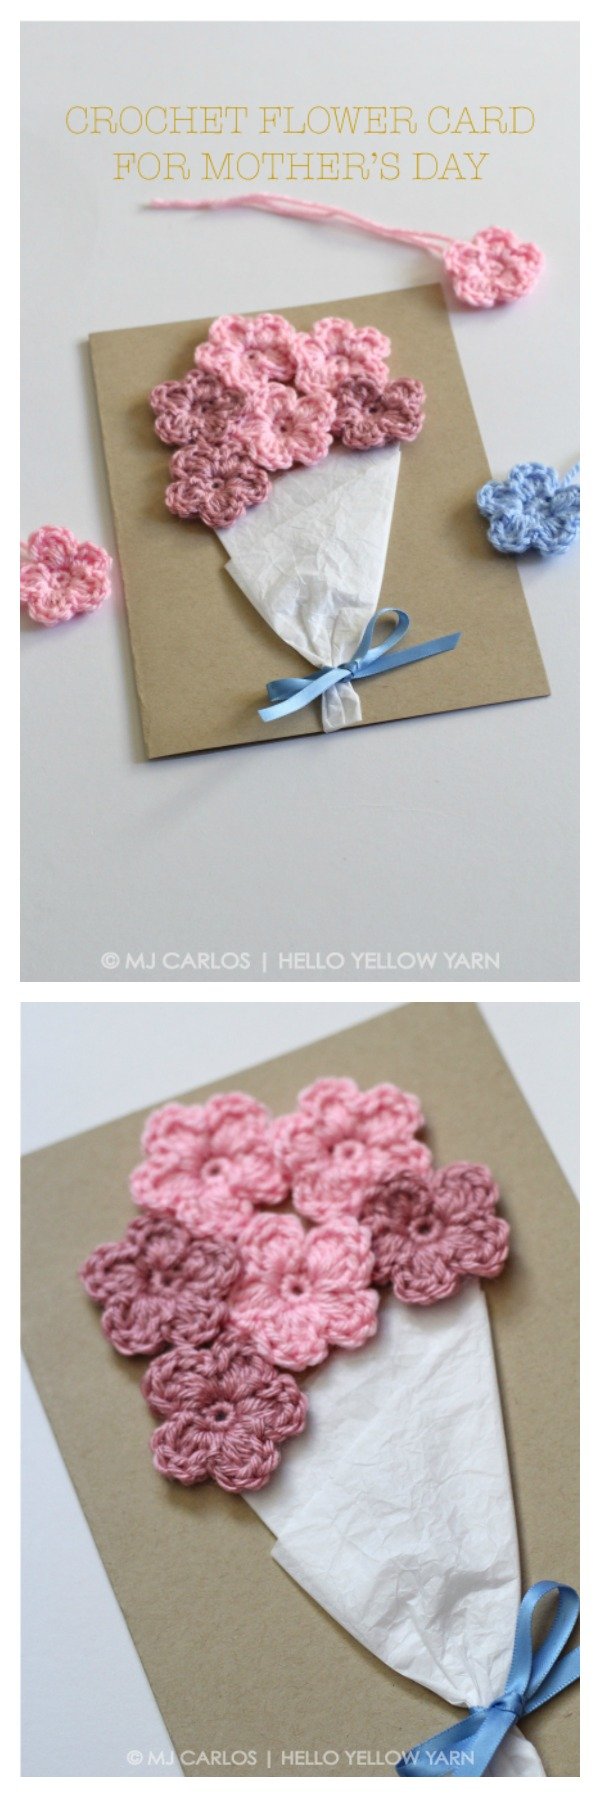 Crochet Flower Card Free Pattern for Mother’s Day